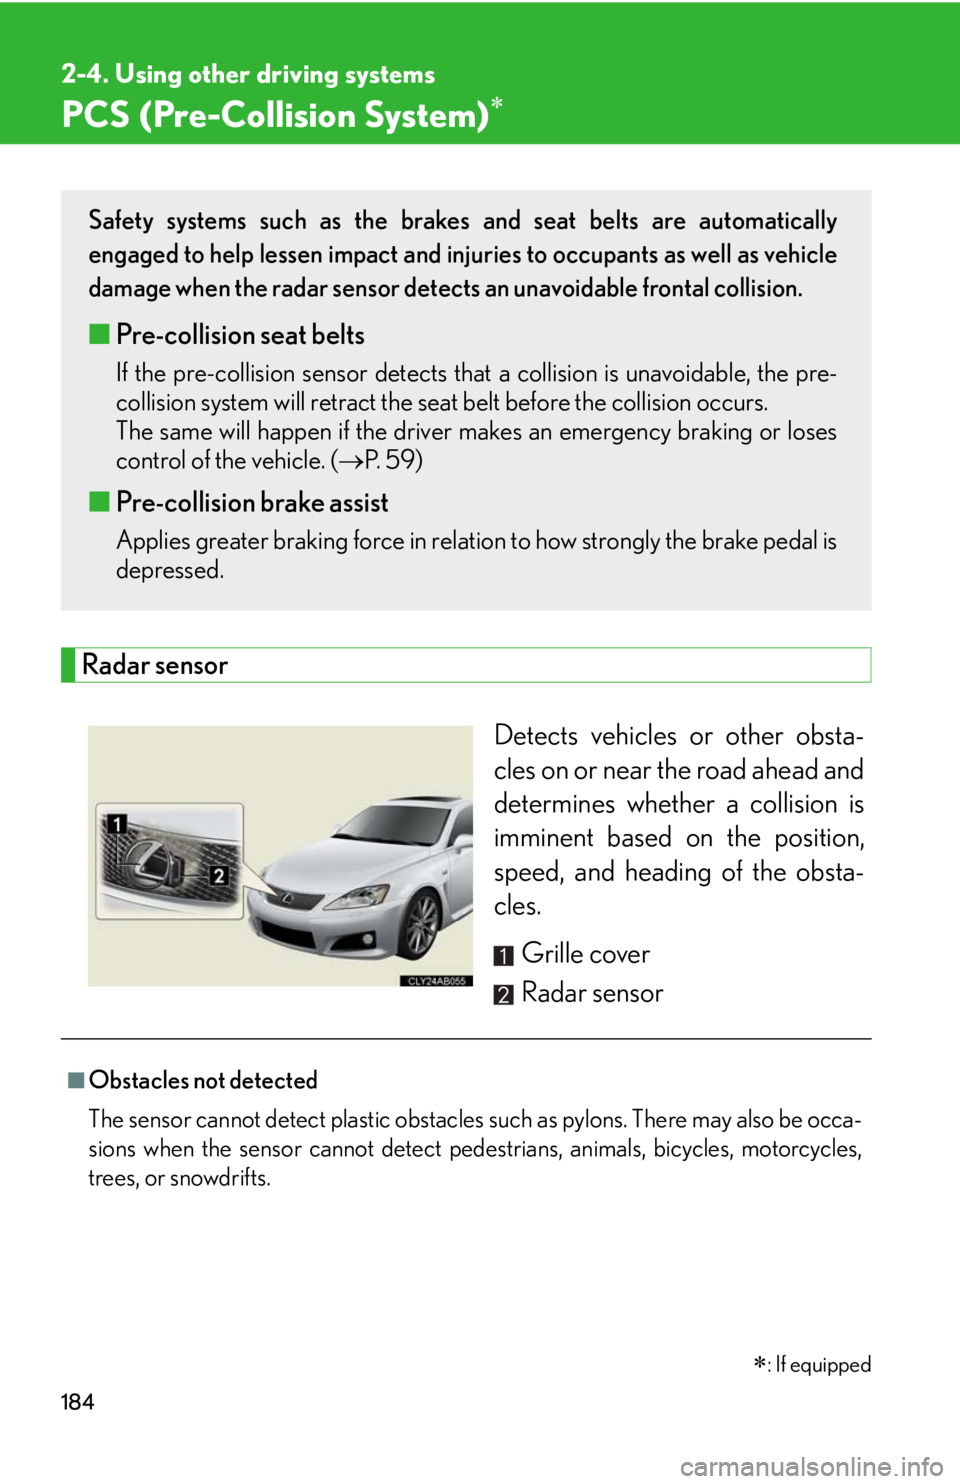 Lexus IS F 2010  Audio/video System / LEXUS 2010 IS F  (OM53A21U) Service Manual 184
2-4. Using other driving systems
PCS (Pre-Collision System)
Radar sensor
Detects vehicles or other obsta-
cles on or near the road ahead and
determines whether a collision is
imminent based on 